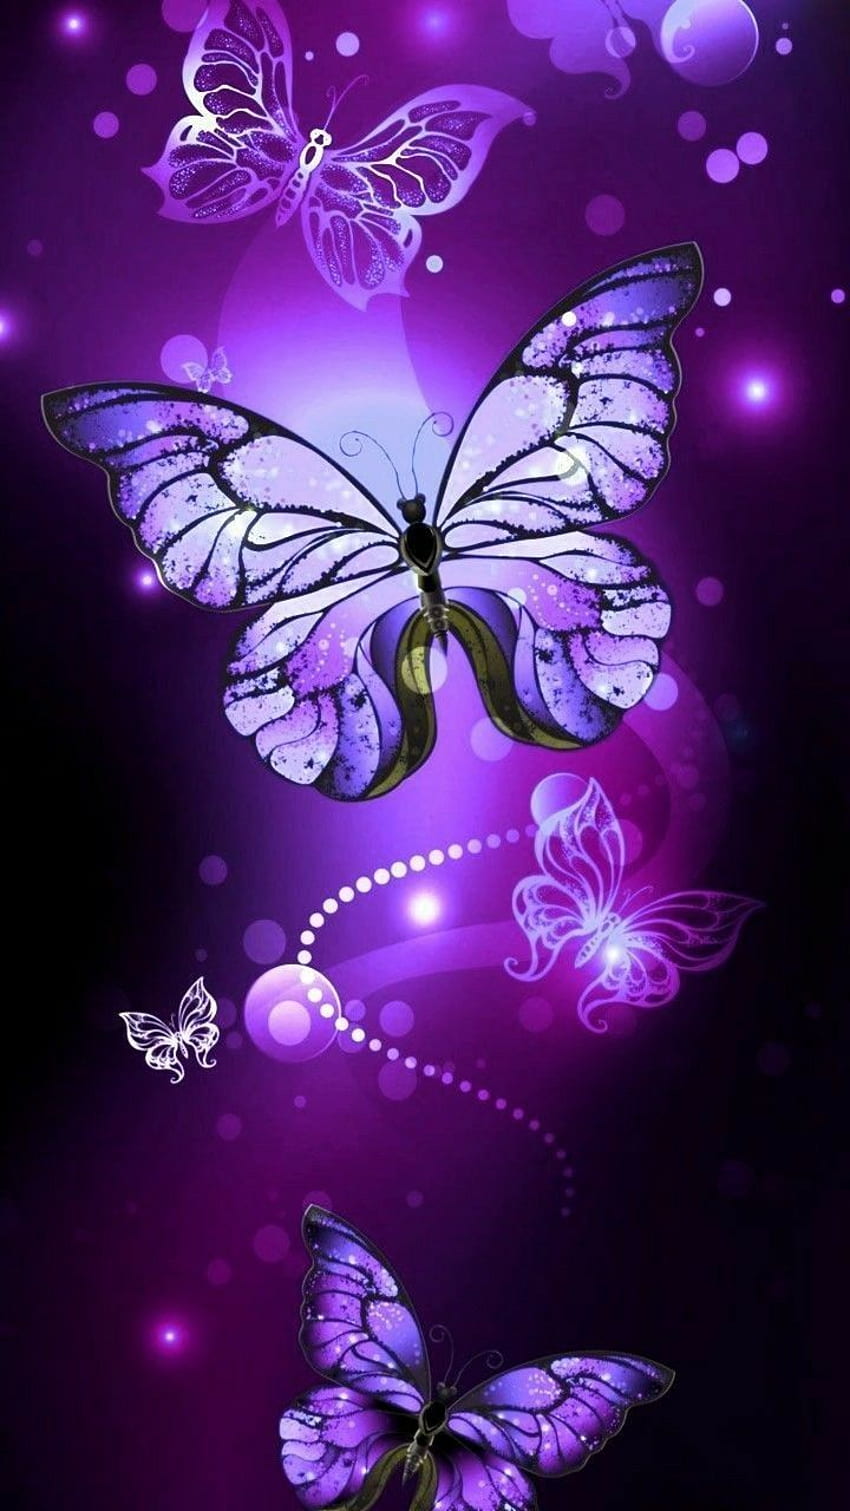 Aggregate more than 66 purple butterfly wallpaper best - in.cdgdbentre